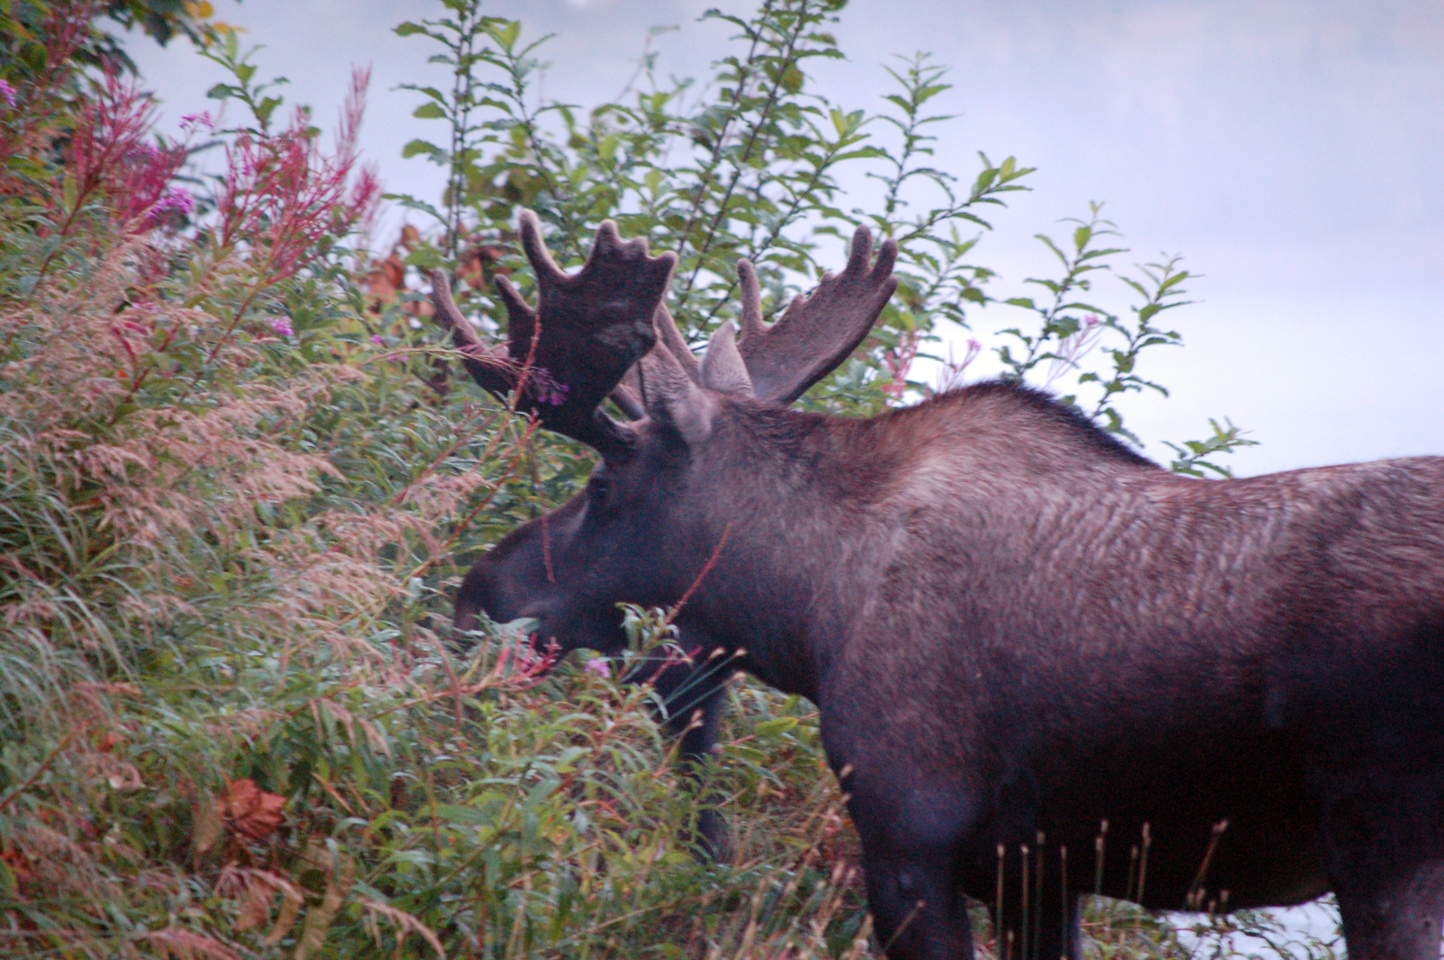 A bull moose feeds by Beluga Lake early on the morning of Aug. 27. Hunting season started Aug. 20. Since hunting is prohibited in Homer city limits, the moose is safe.-Photo by Michael Armstrong, Homer News